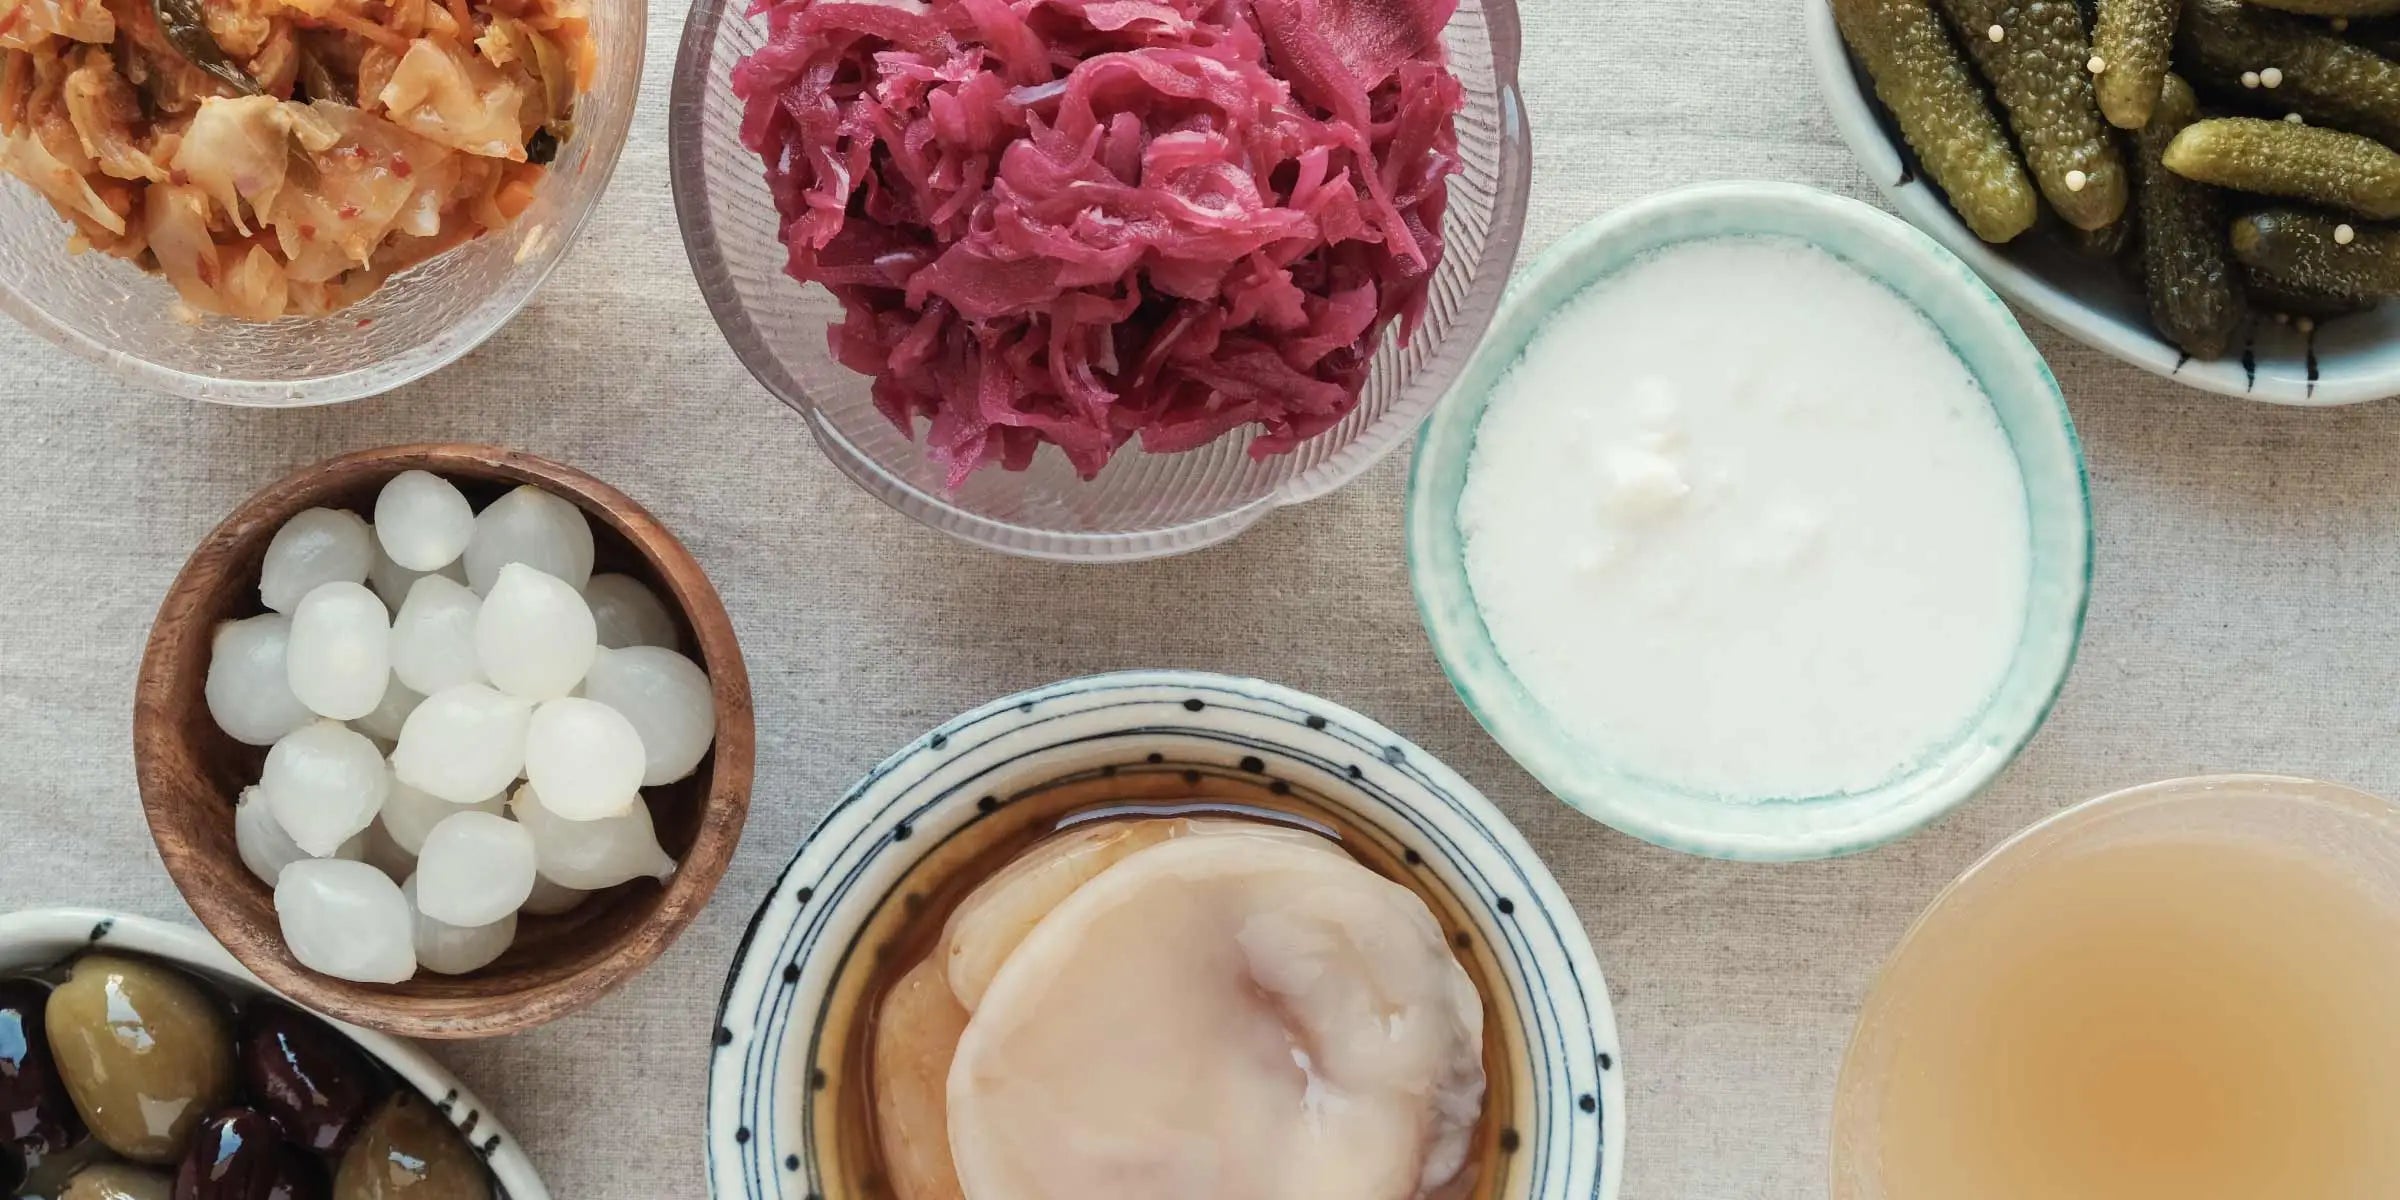 Fermented foods sitting on table